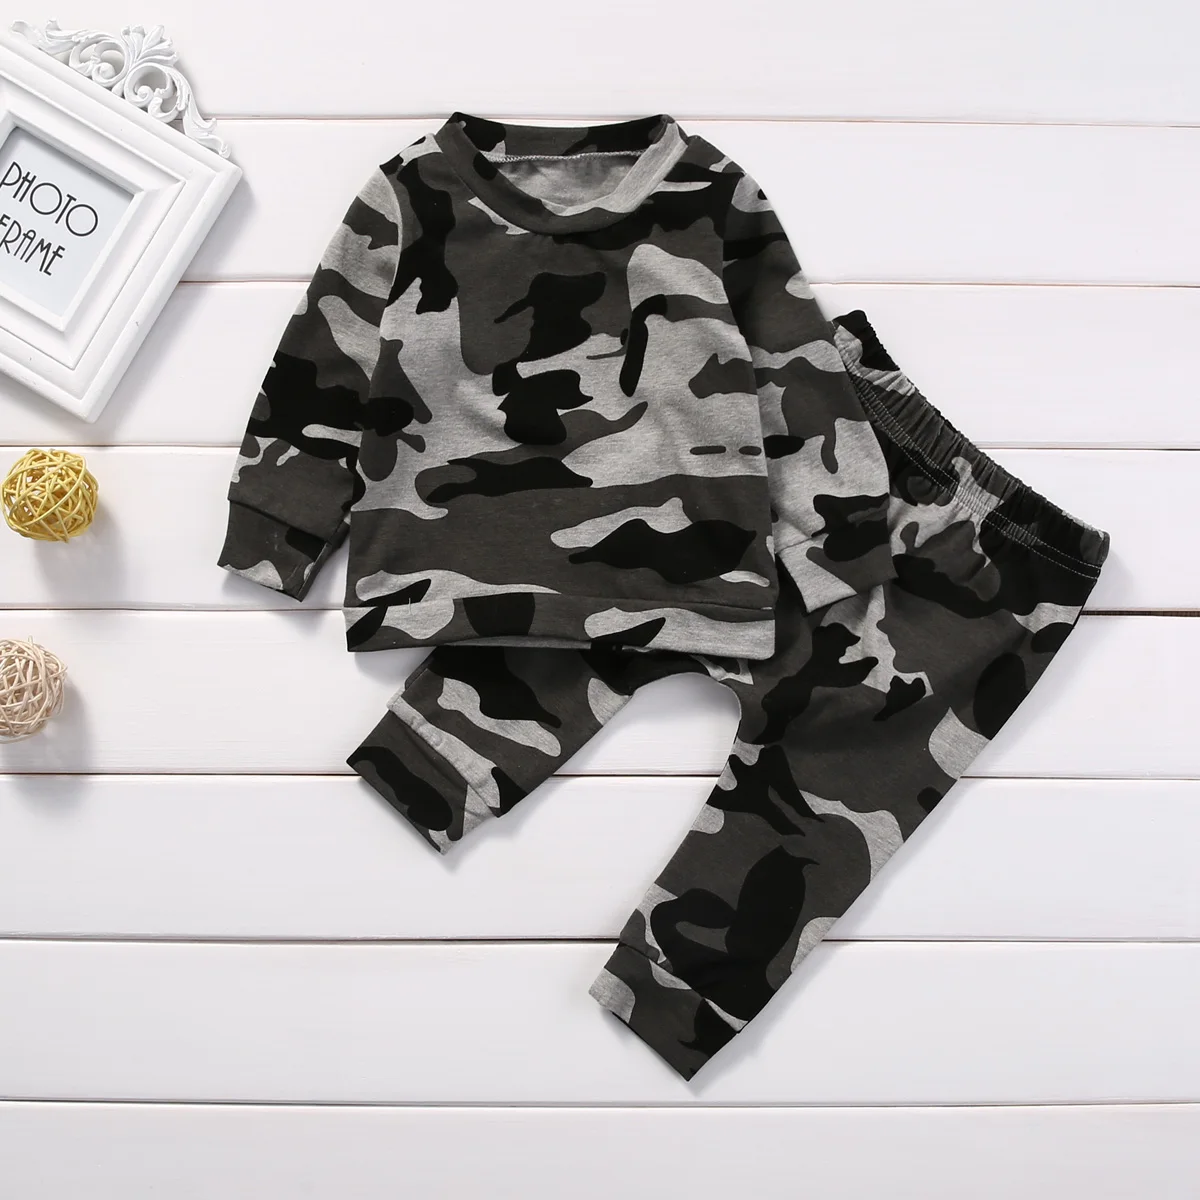 2pcs new baby clothing set Toddler Infant Camouflage Baby Boy Girl Clothes T-shirt Tops+Pants Outfits Set